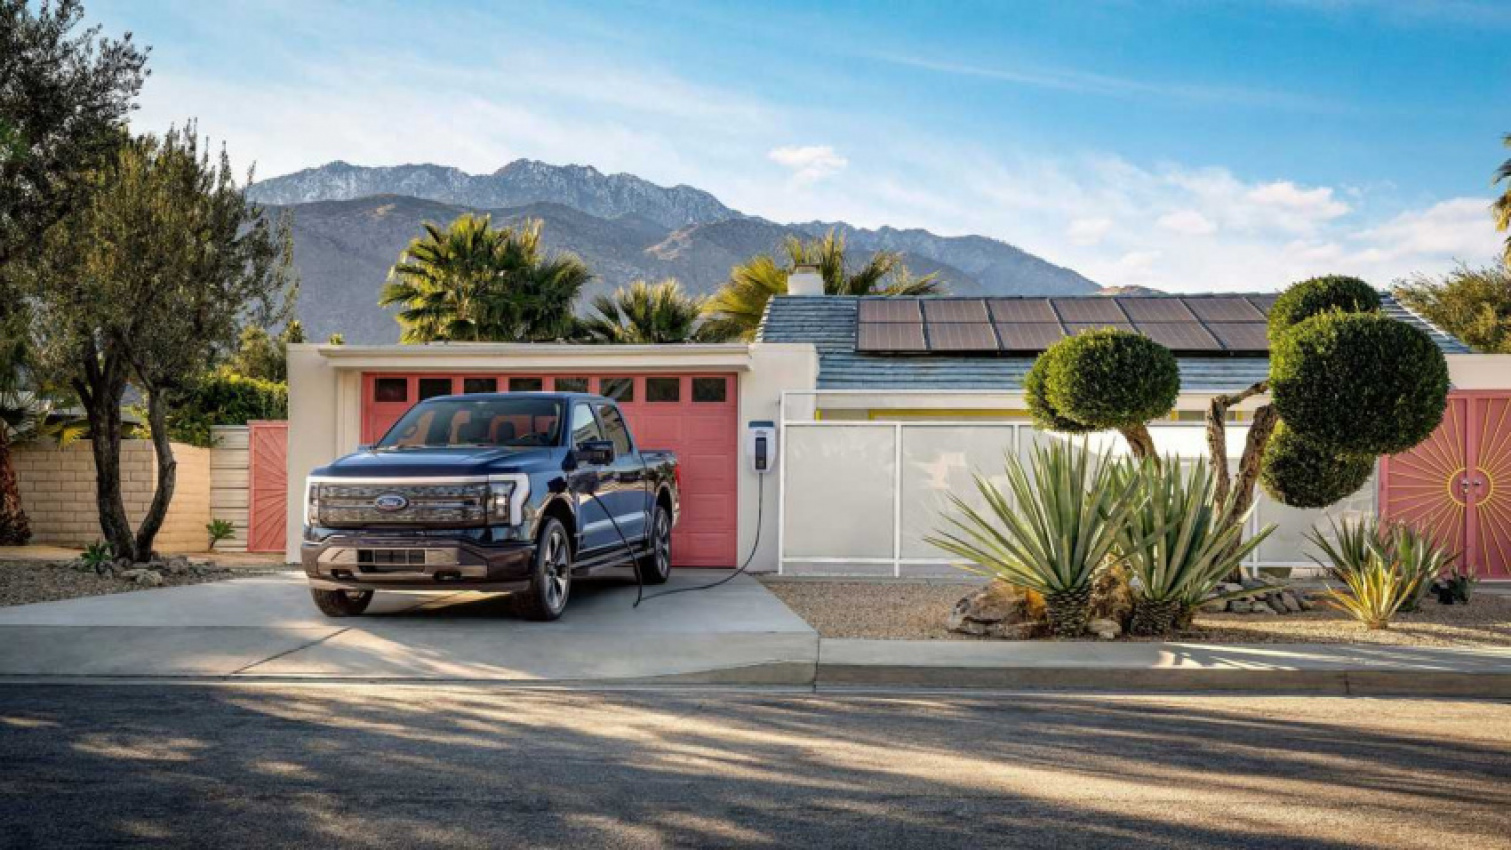 autos, cars, evs, ford, ford f-150, here’s how the 2022 ford f-150 lightning will light up your home